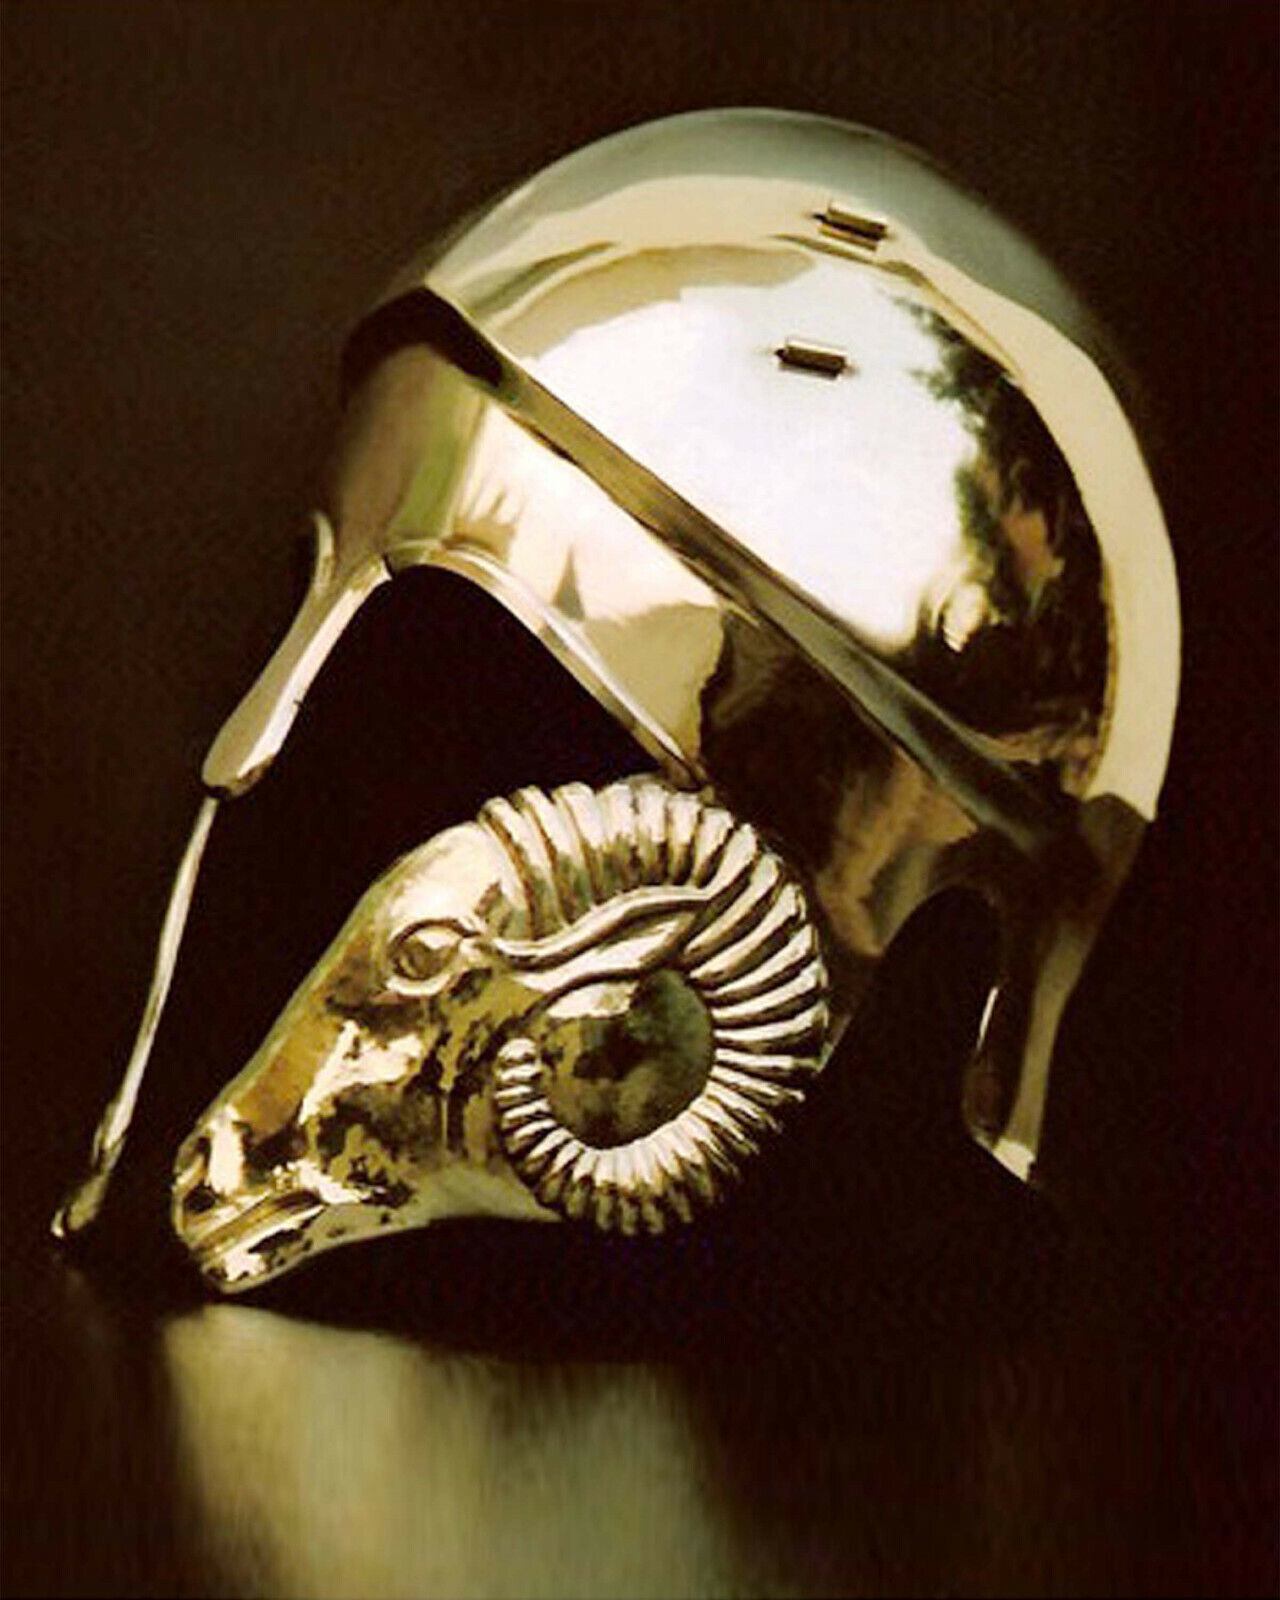 Chalcidian Style Greek Helmet With Face Shields in the design of a Ram\'s head